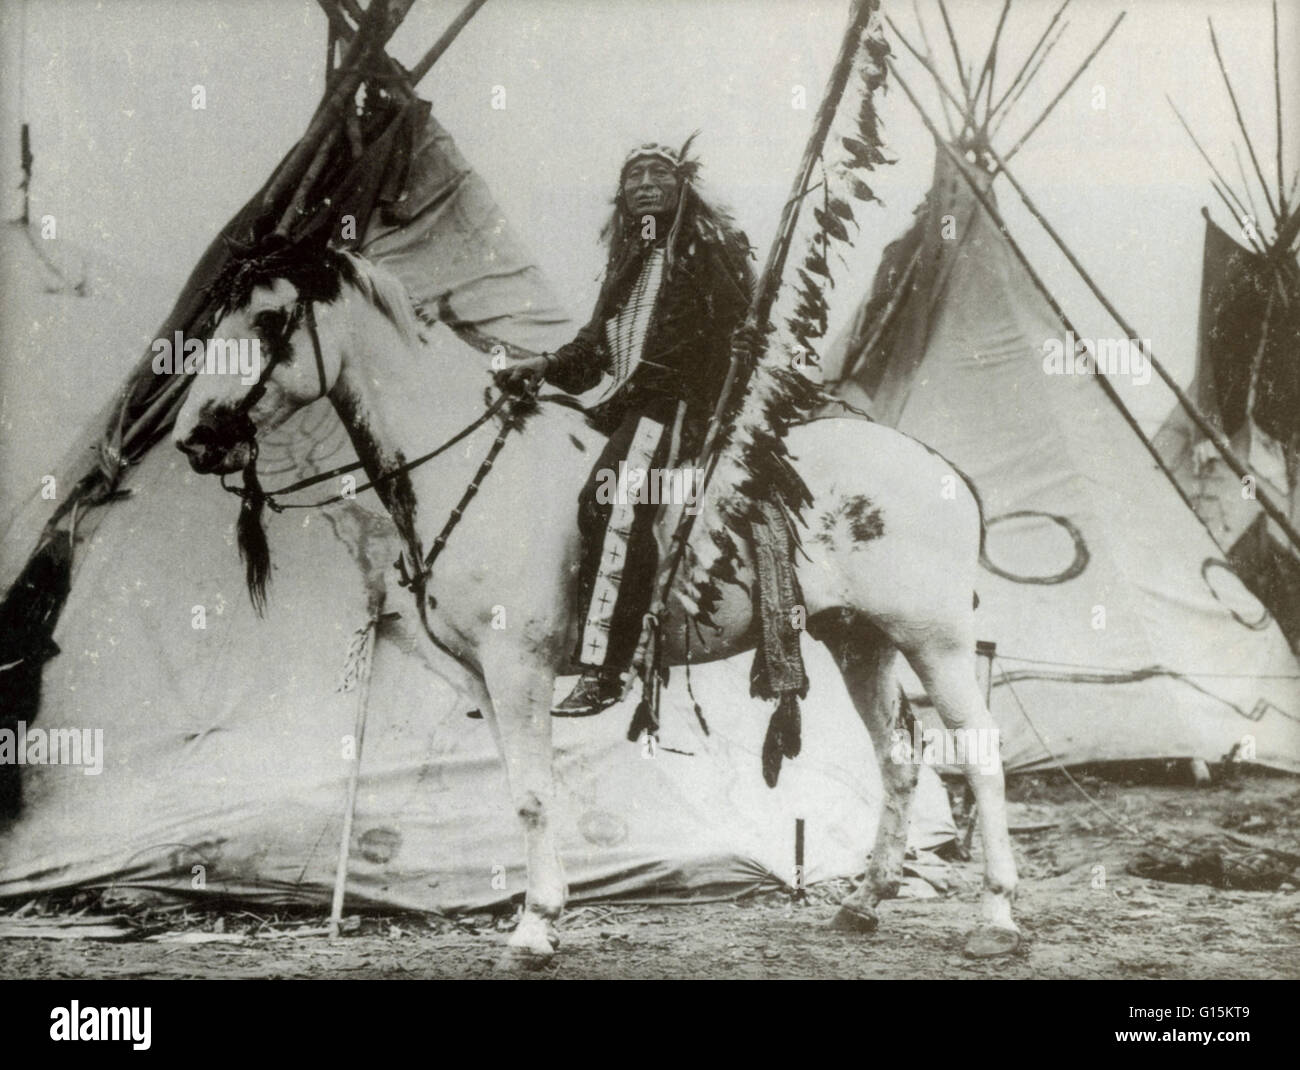 Iron Tail was a Sioux Chief who fought in both the Battle of Little Bighorn and Wounded Later he performed with Buffalo Bill's Wild West Show, and was a model